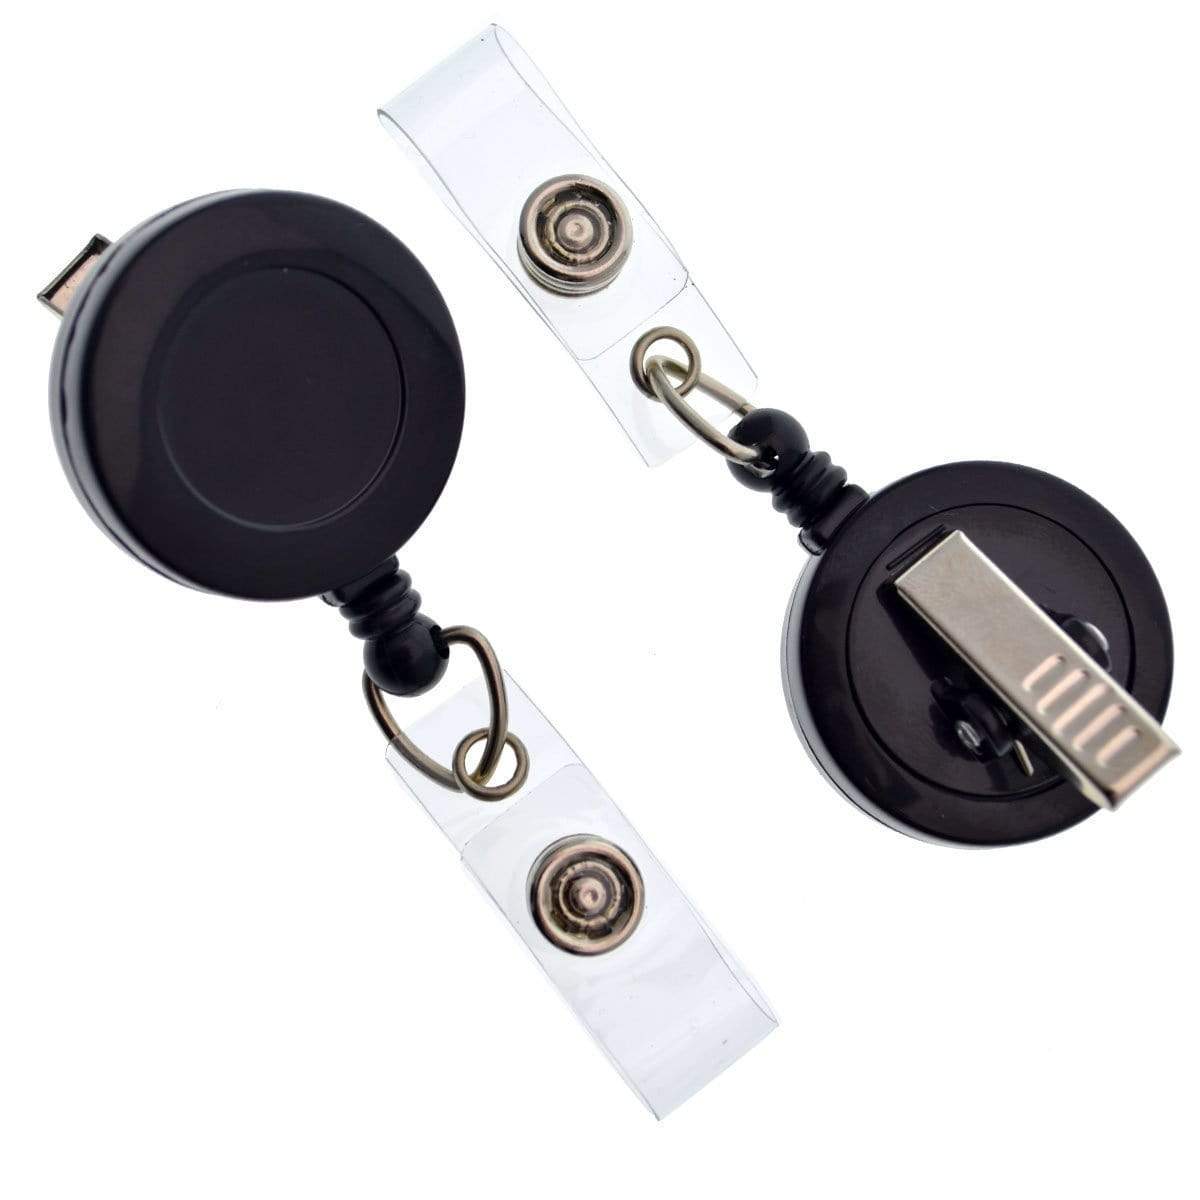 Black Badge Reel With Swivel Spring Clip (2120-7601) at SpecialistID –